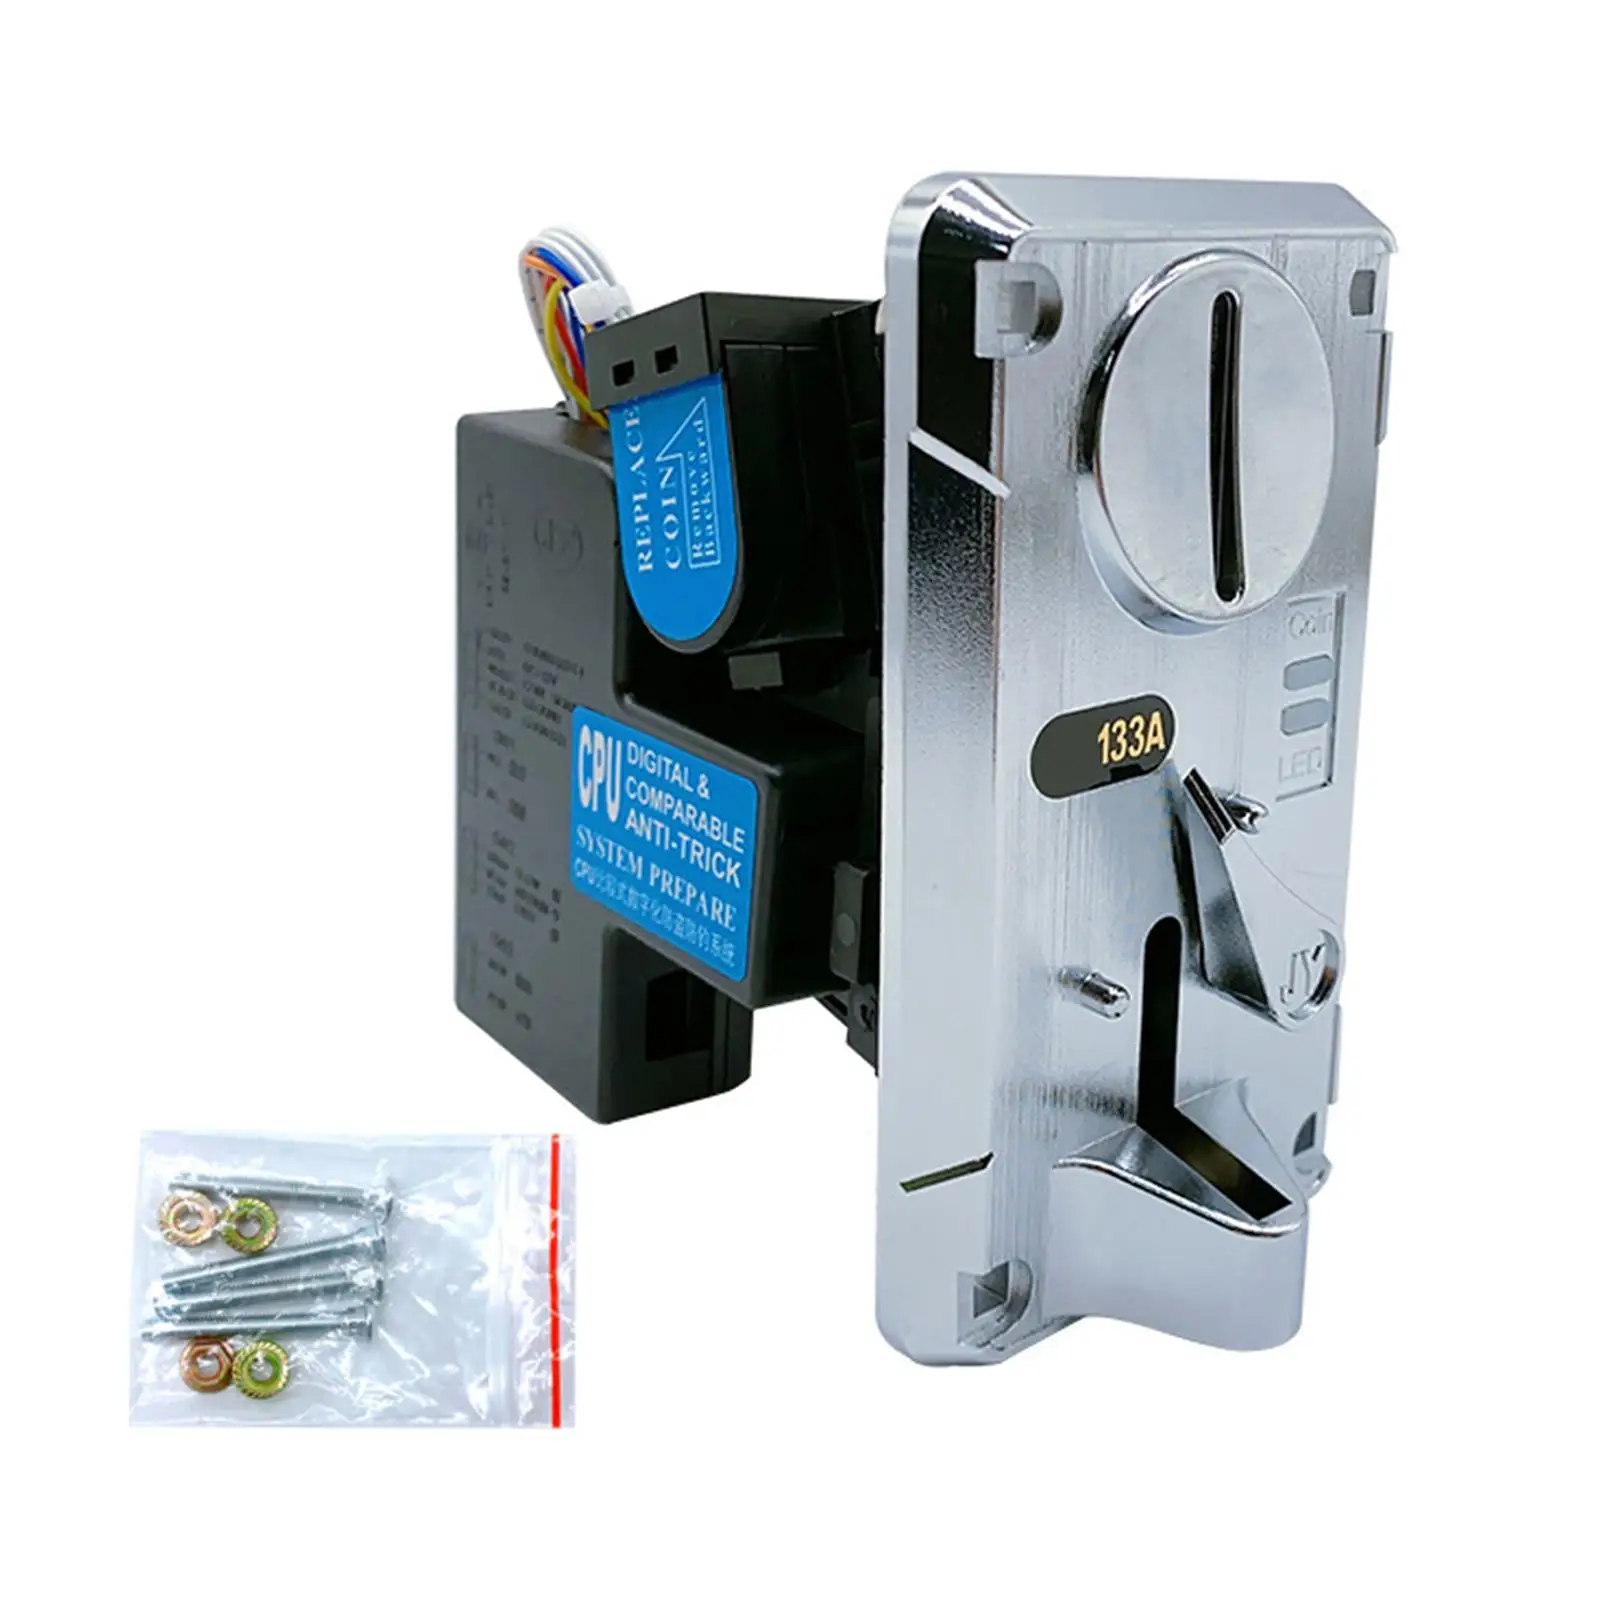 Coin Acceptor Selector Universal for Coin Operated Telephone Massage Chairs